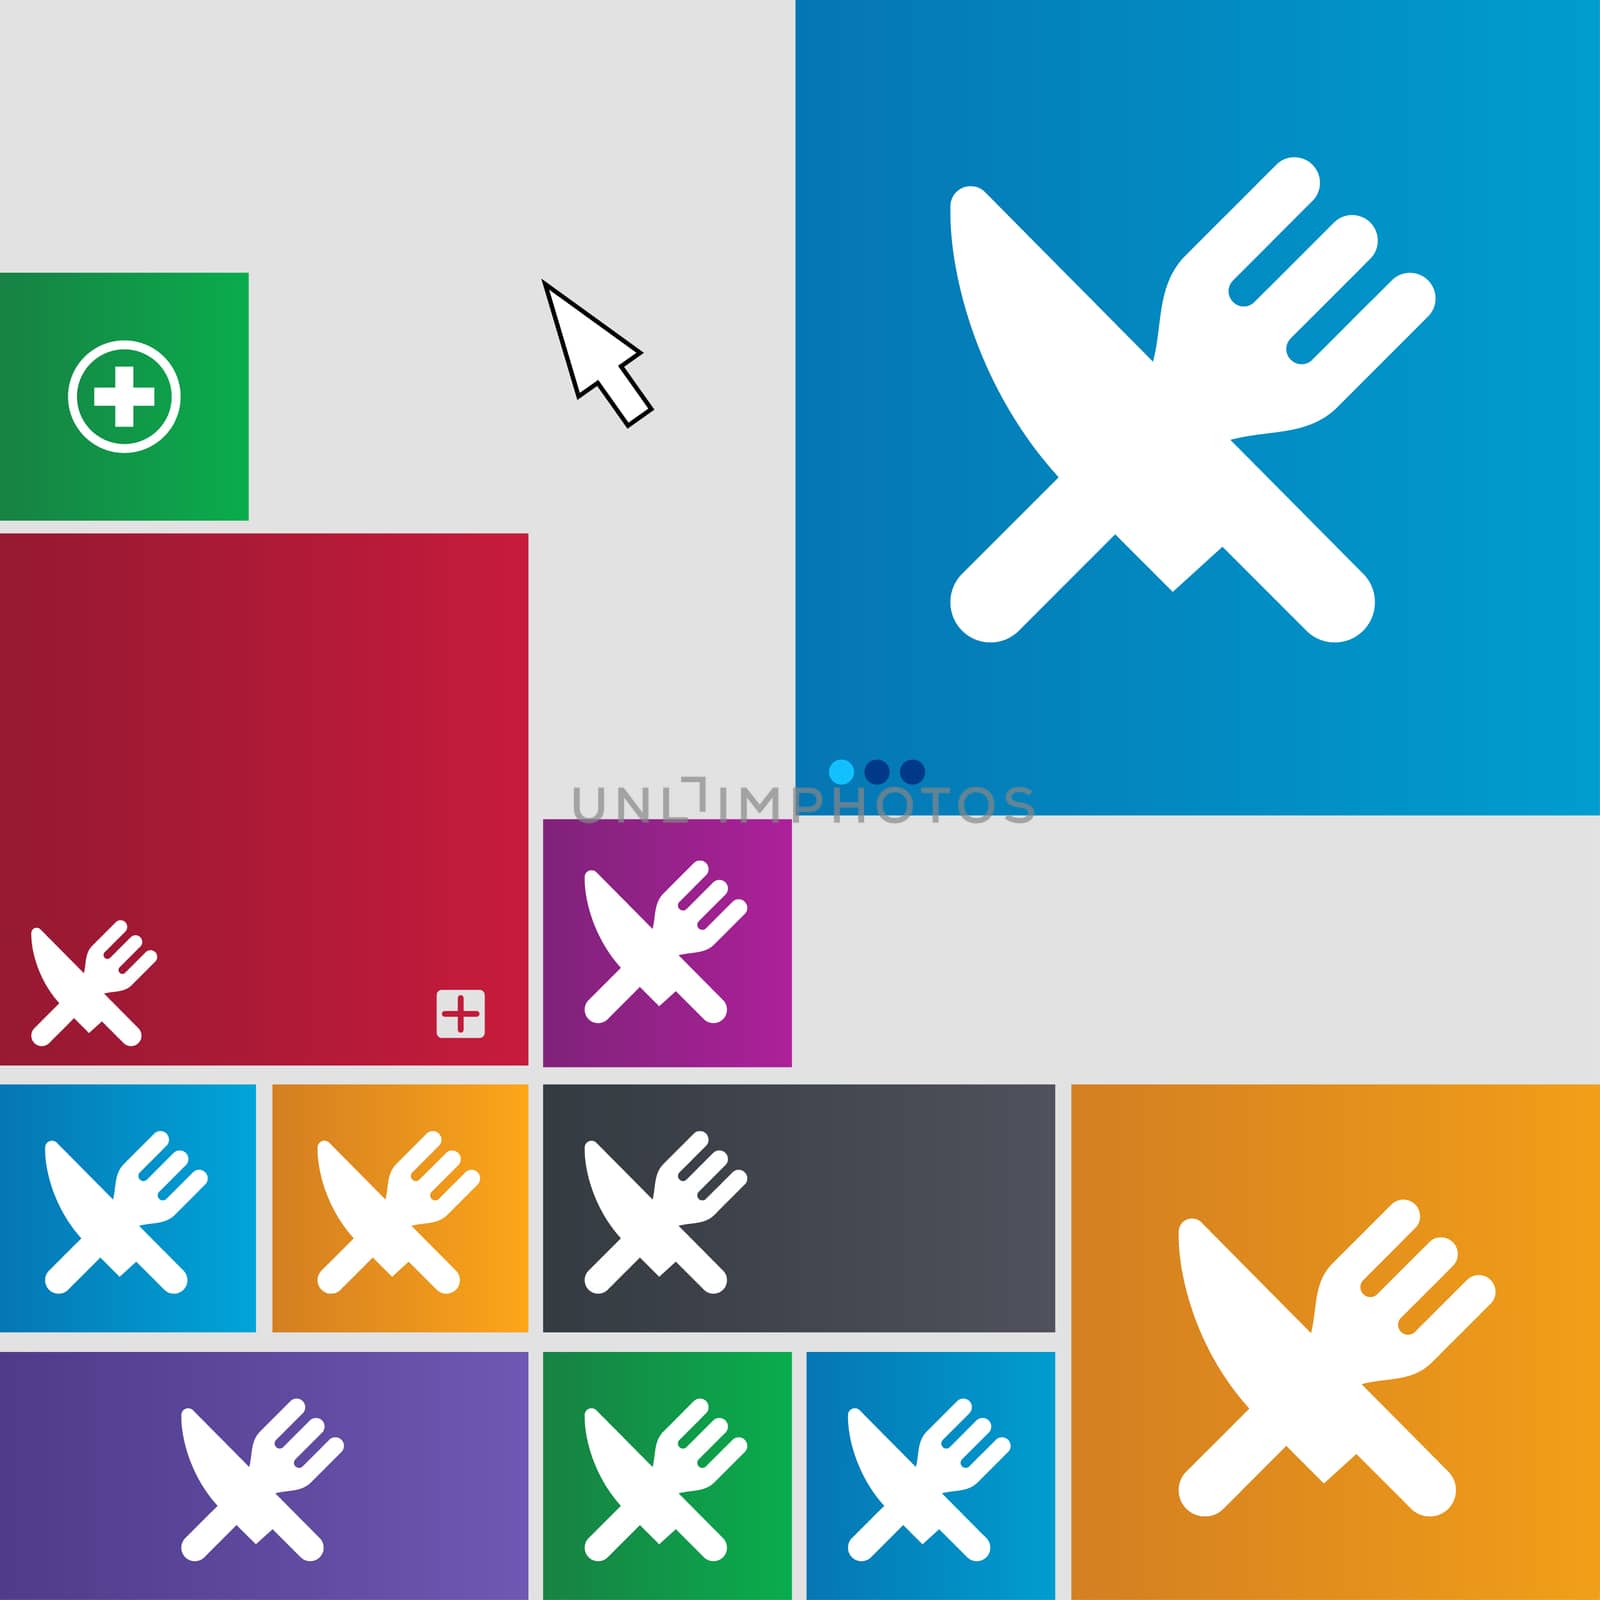 Eat, Cutlery icon sign. buttons. Modern interface website buttons with cursor pointer. illustration